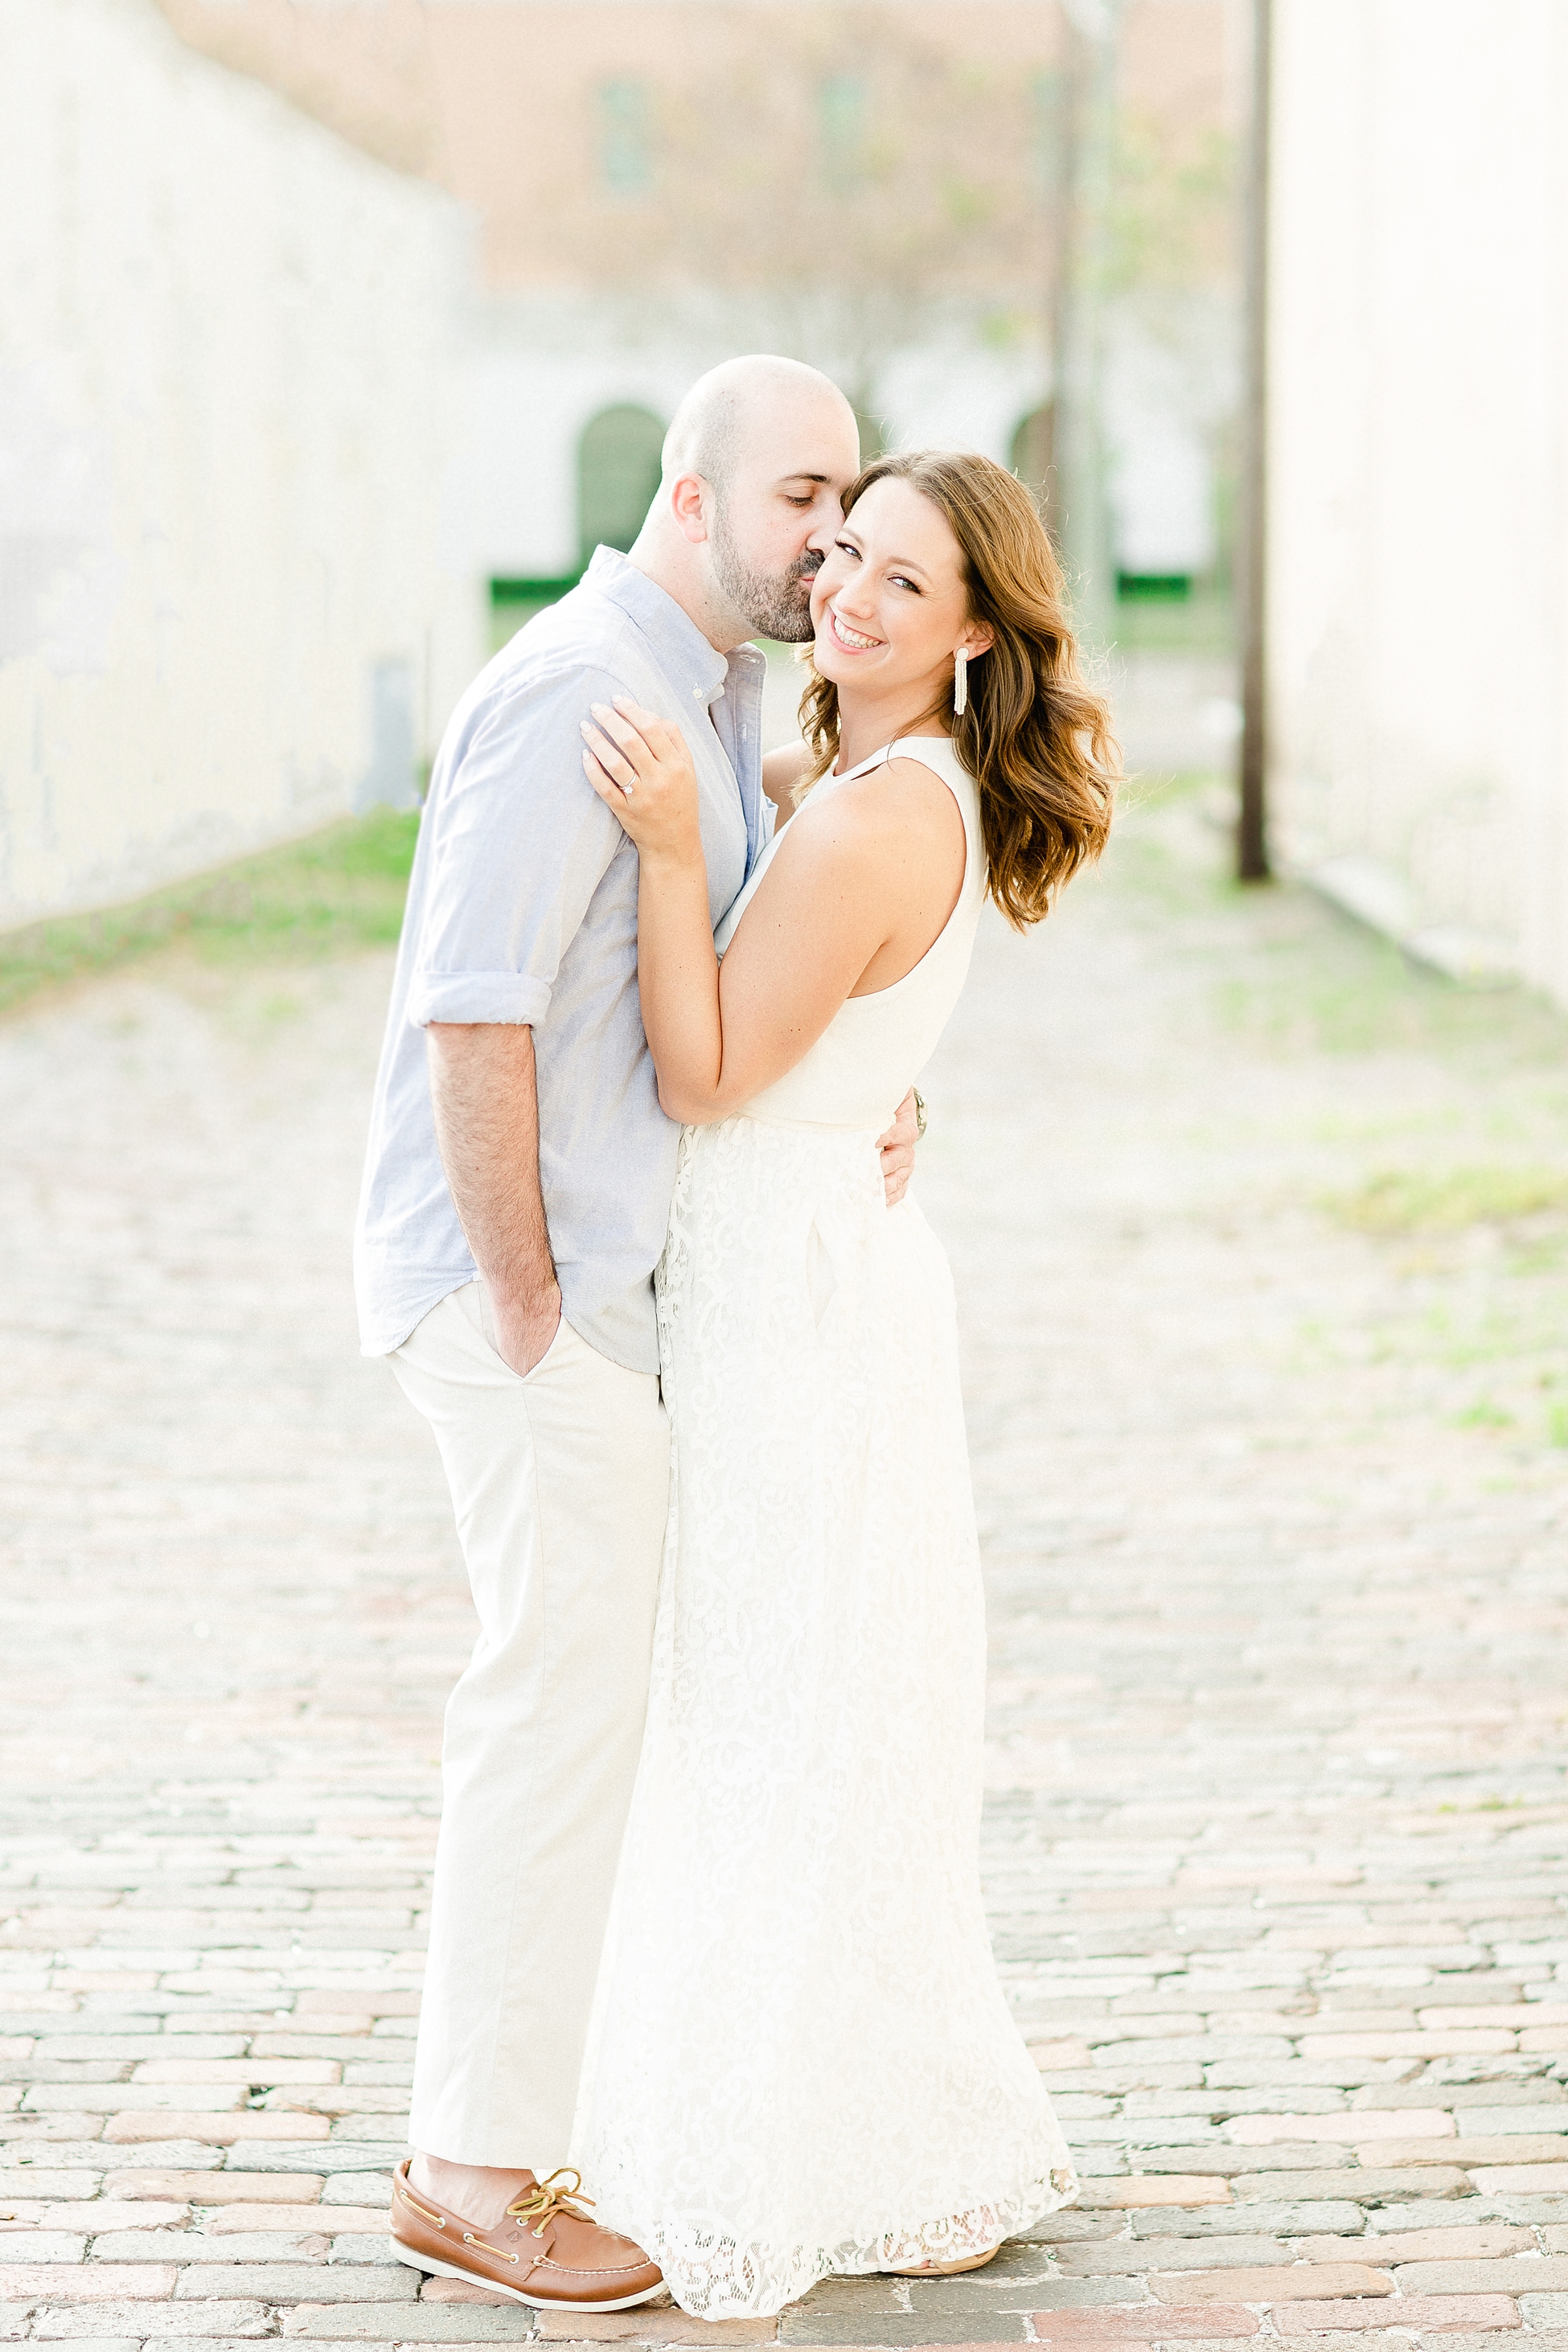 Downtown Tampa Engagement |© Ailyn La Torre Photography 2018